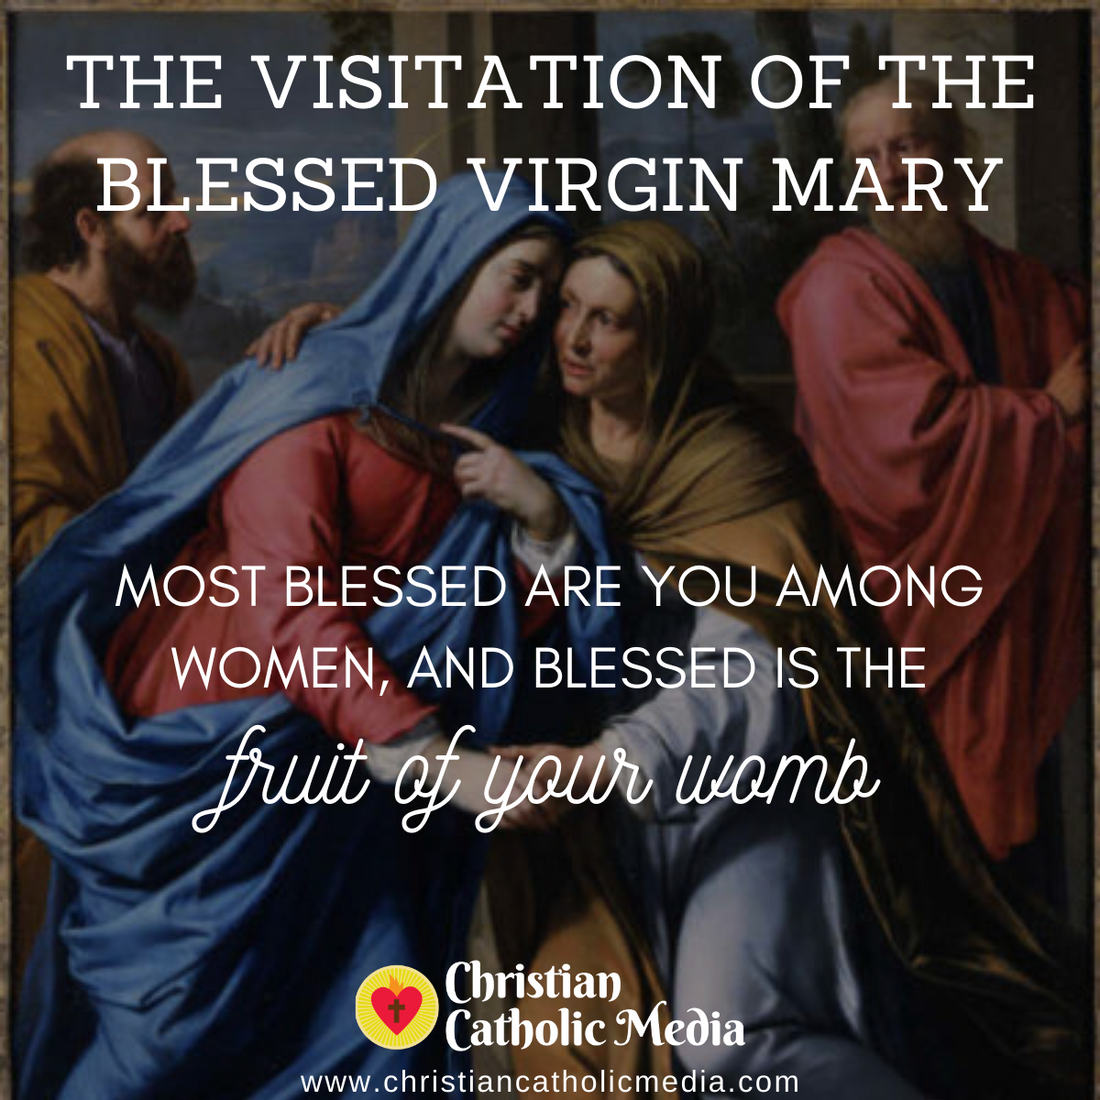 Visitation of the Blessed Virgin Mary - Monday May 31, 2021